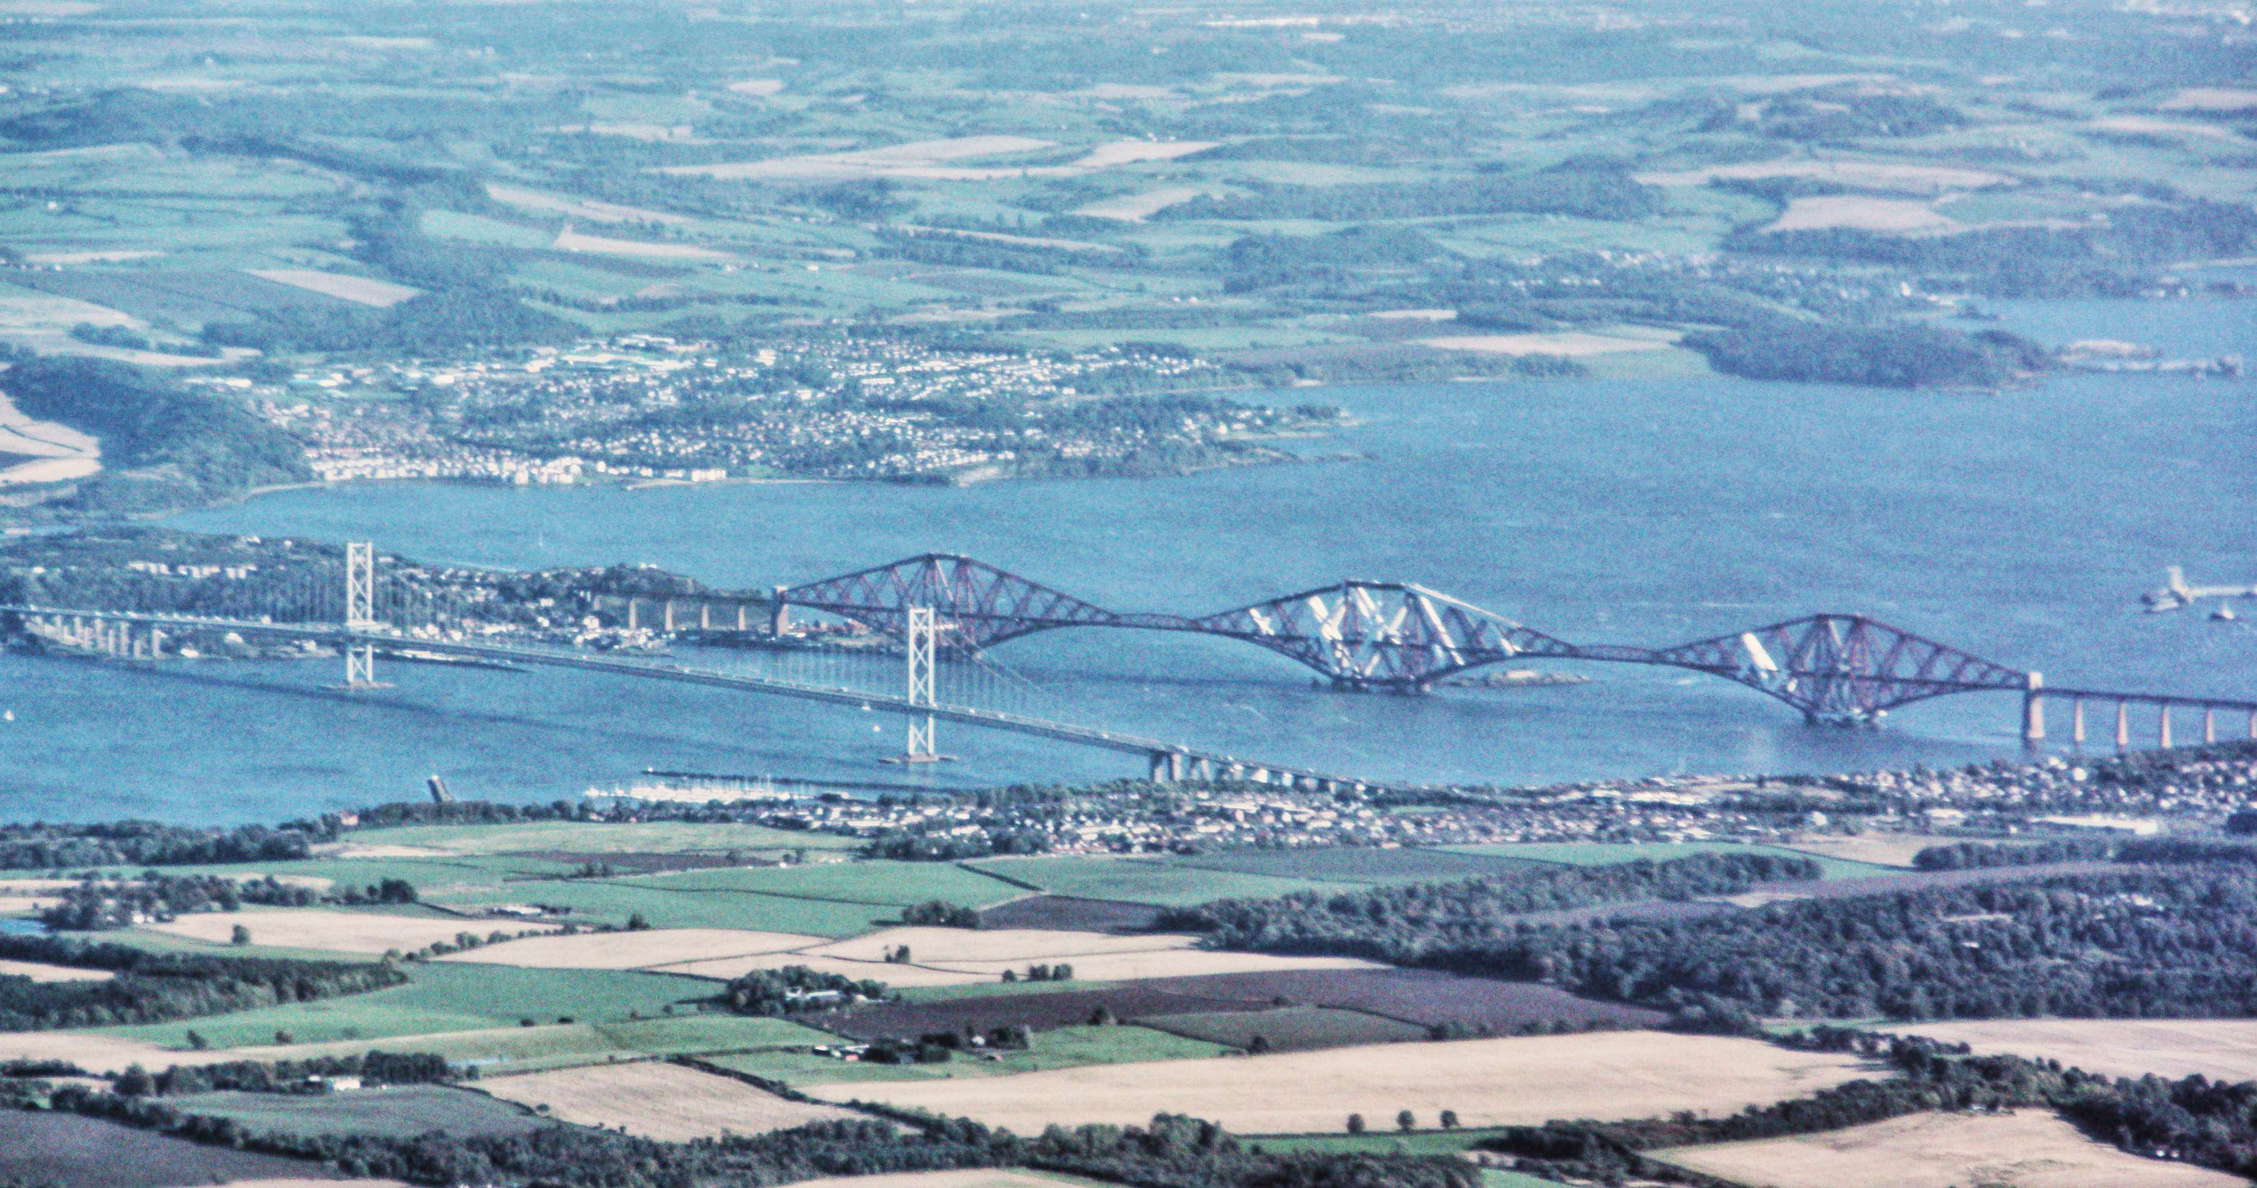 Firth of Forth with Forth bridges